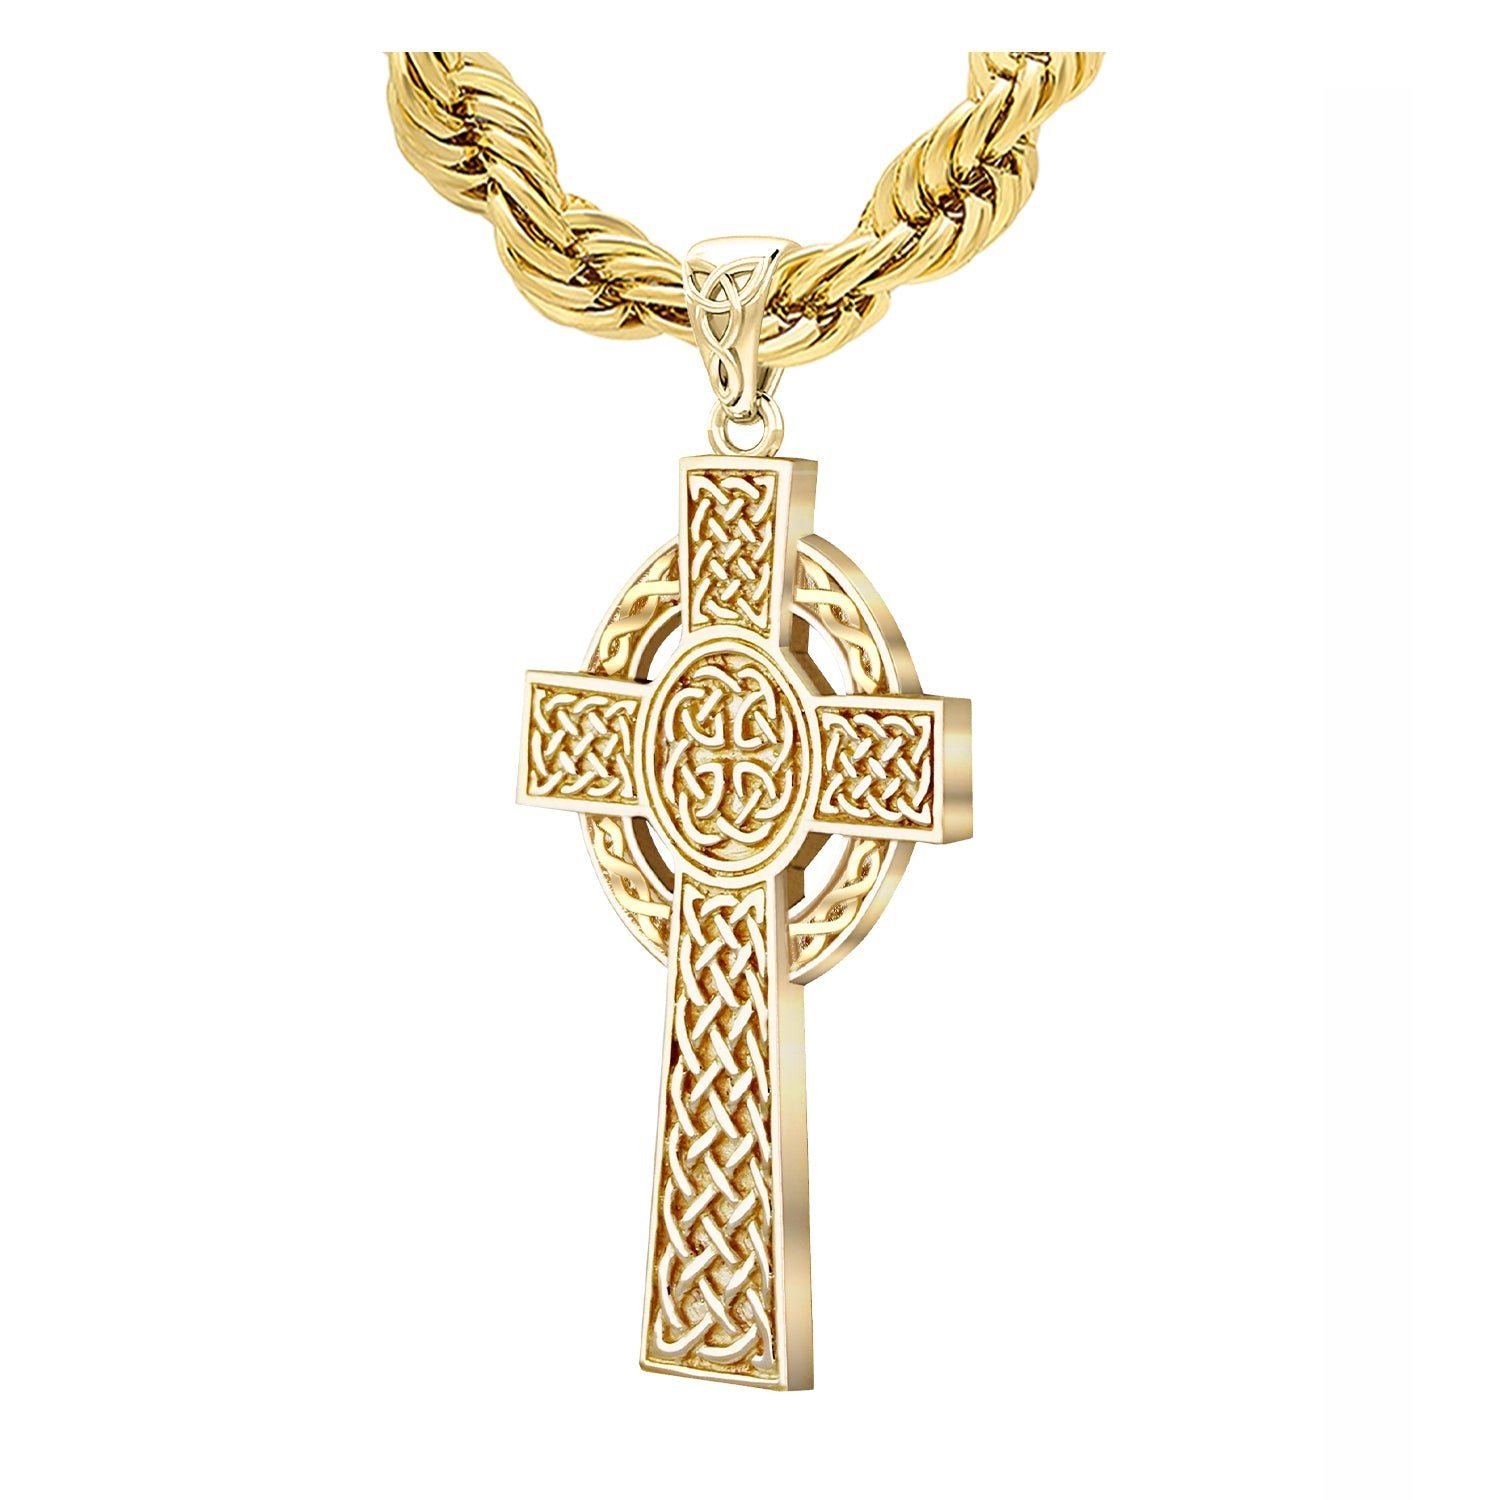 Men's Heavy 11g Solid 14k Yellow Celtic Cross Pendant Necklace, Polished Finish - US Jewels